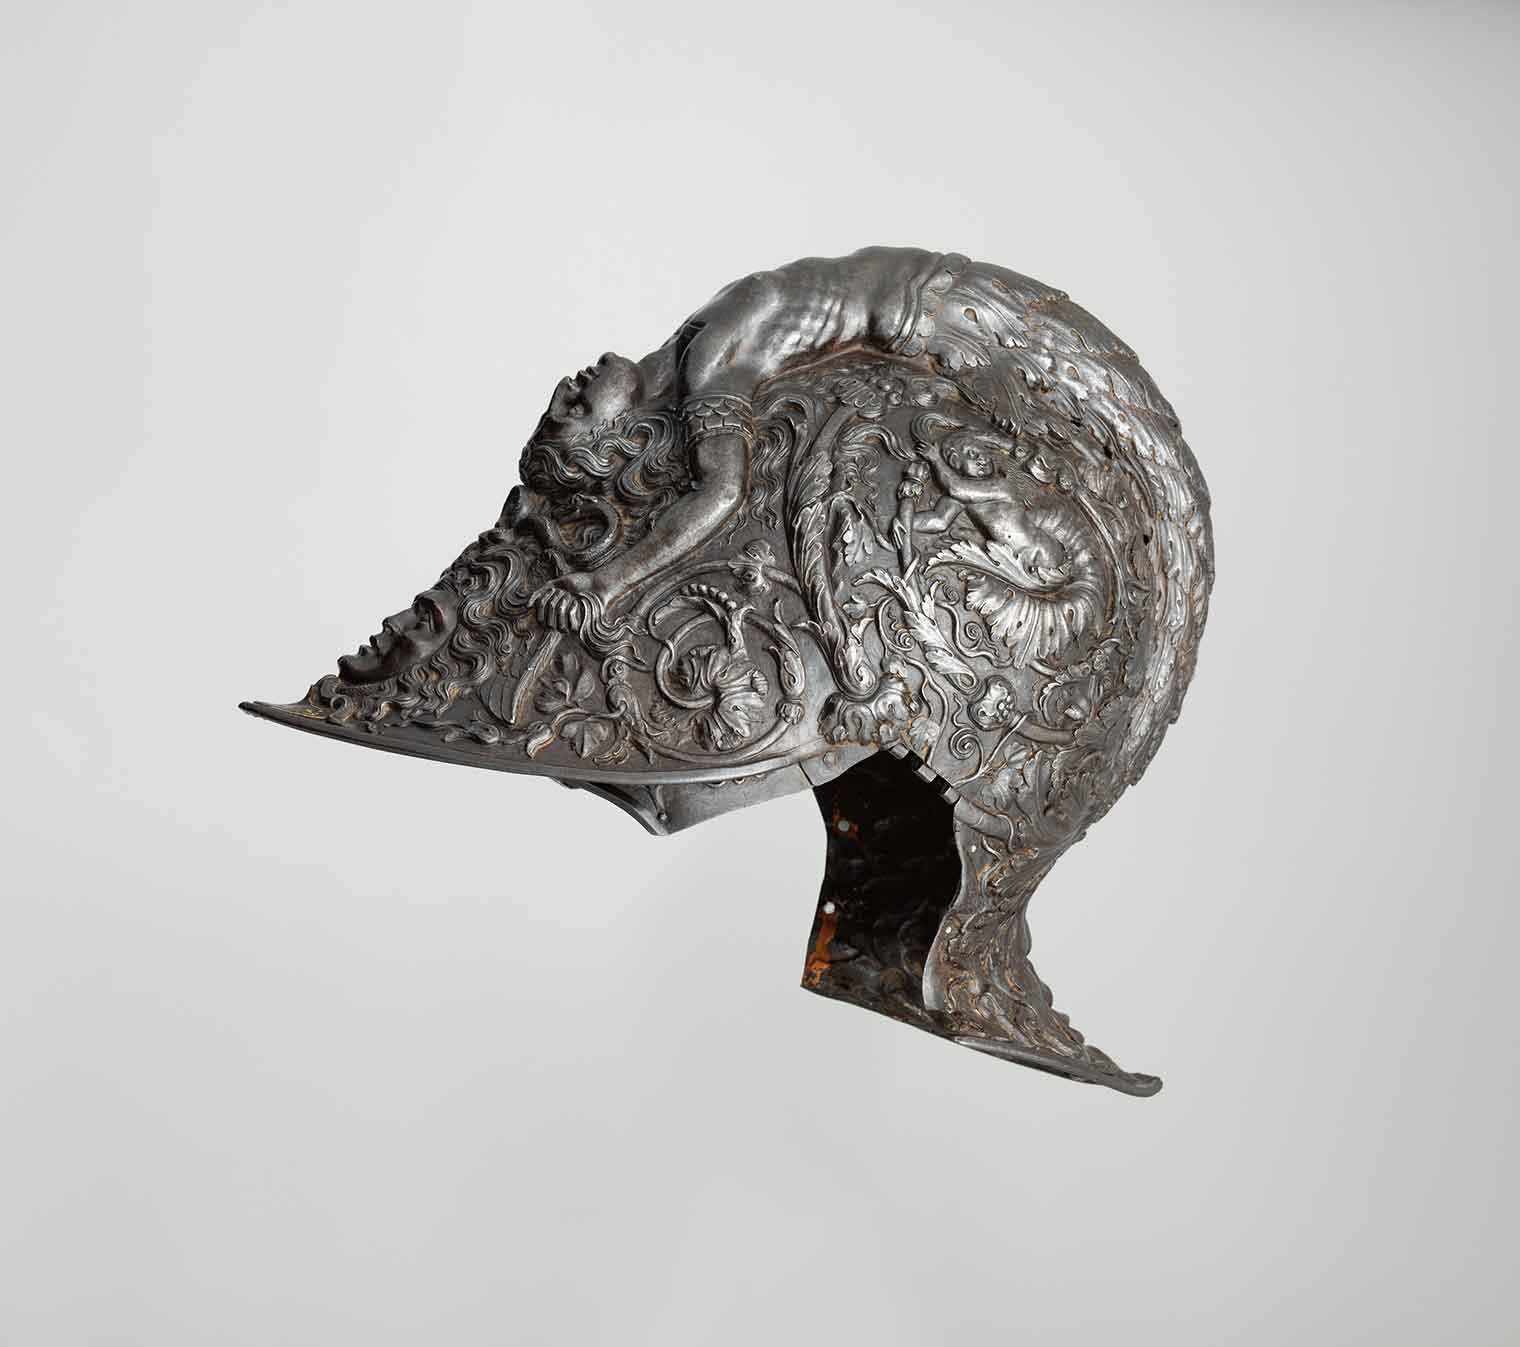 A silver helmet with a mermaid design and other ornate patterns.